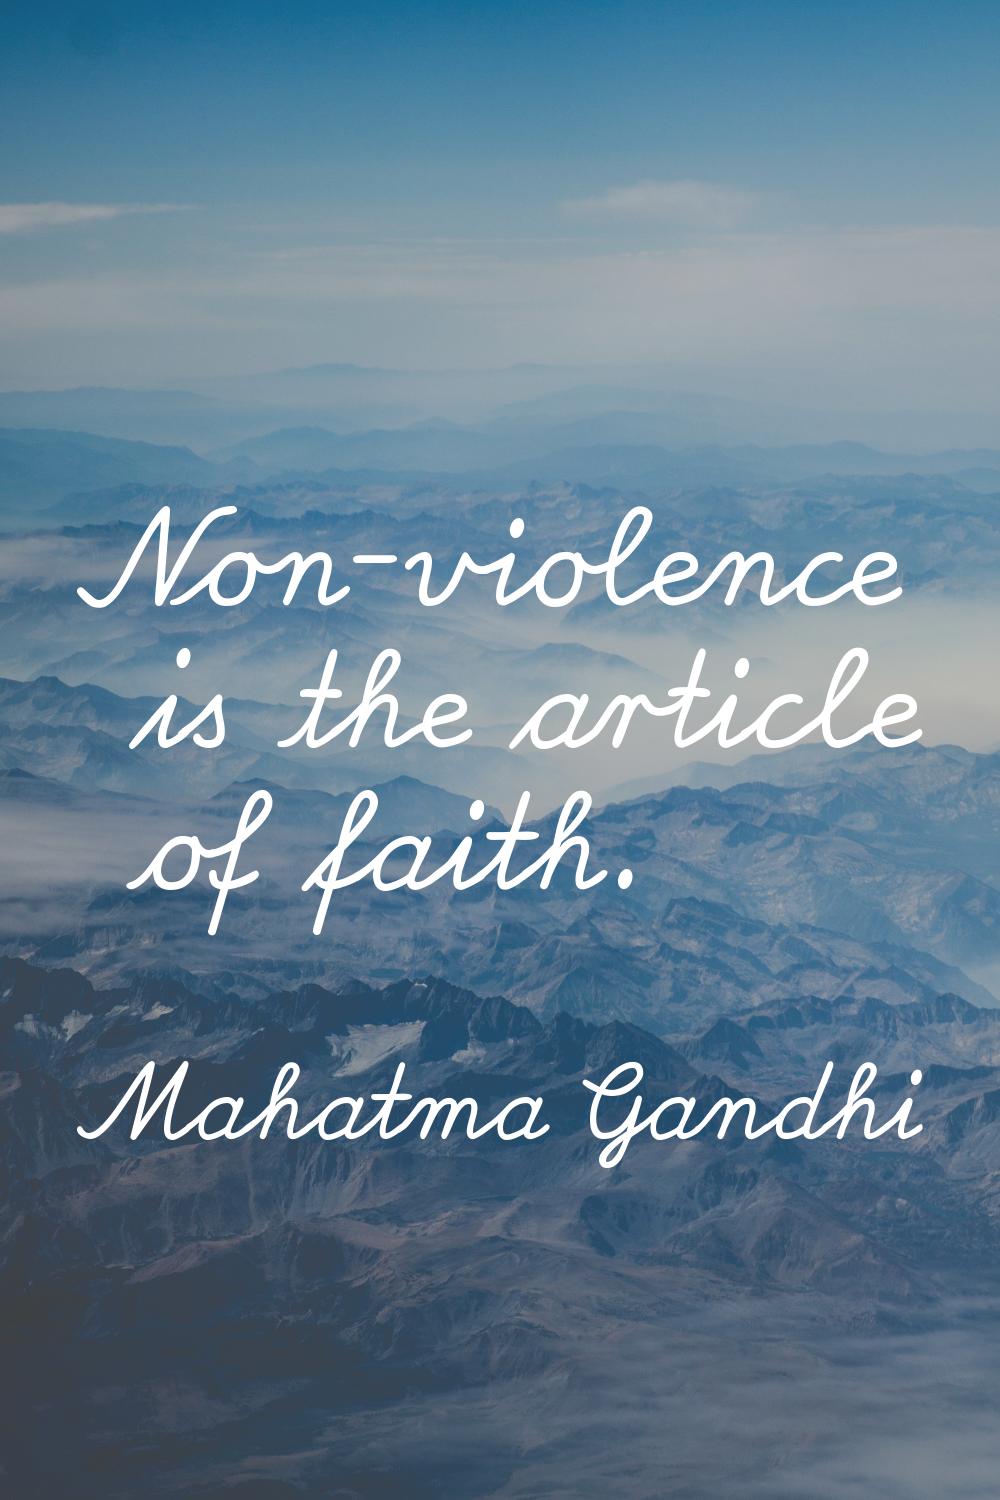 Non-violence is the article of faith.